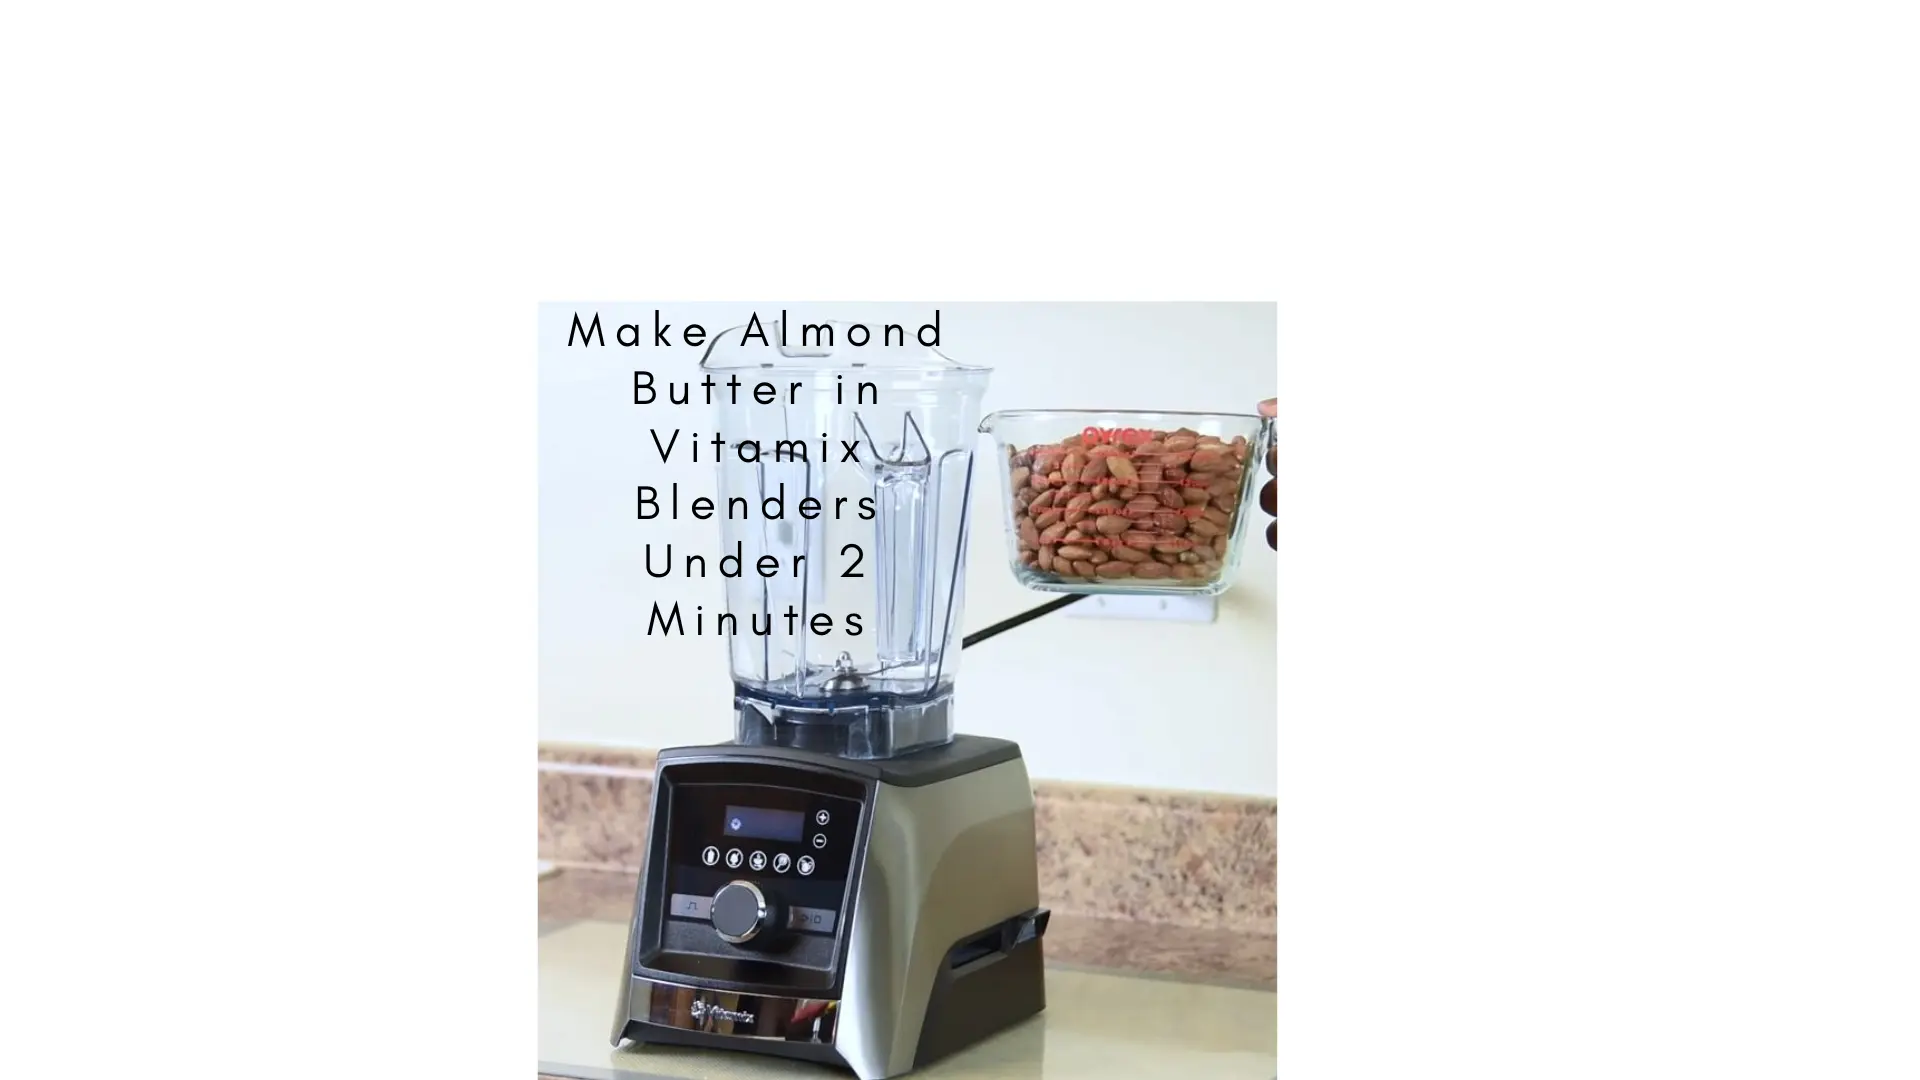 How to Make Almond Butter in Vitamix Blenders